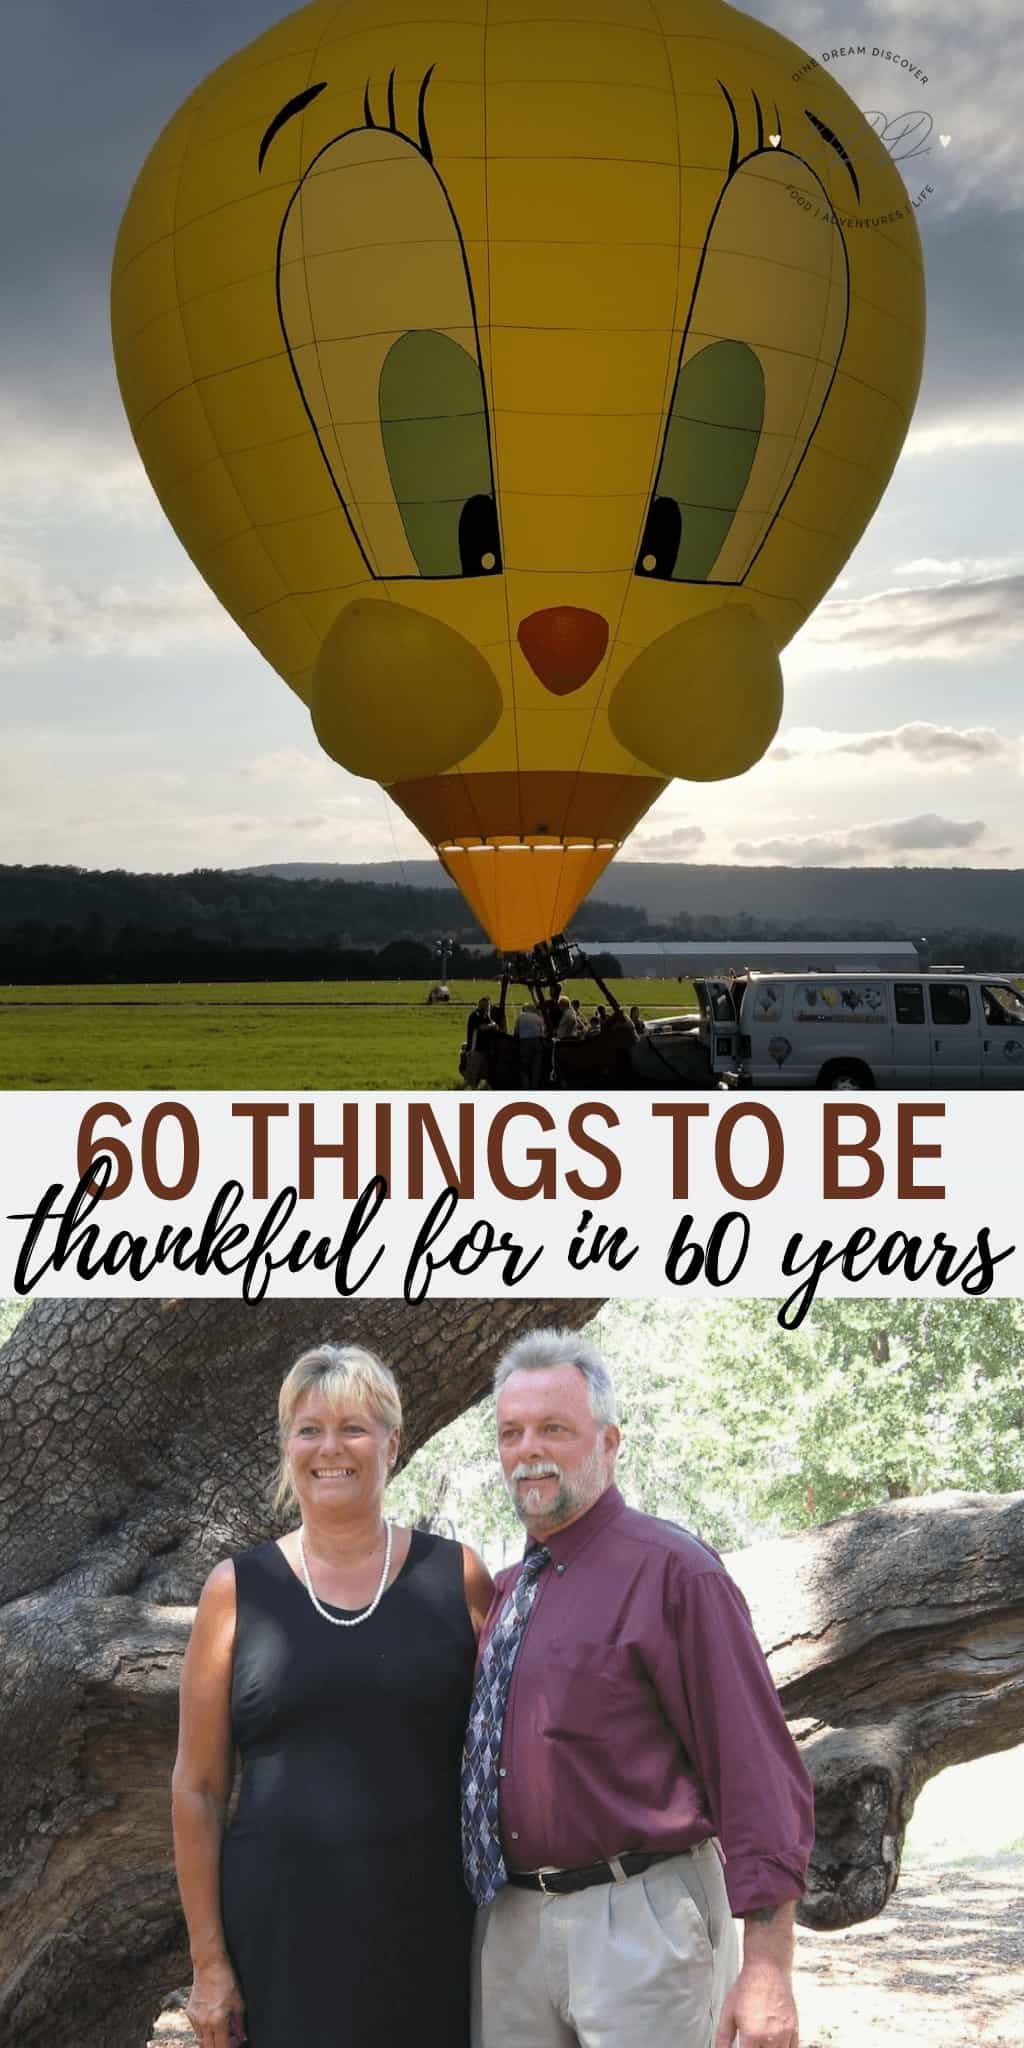 I will be turning 60 in October and I'm not really depressed about it because In 60 years I am thankful for so many things and here is my list!